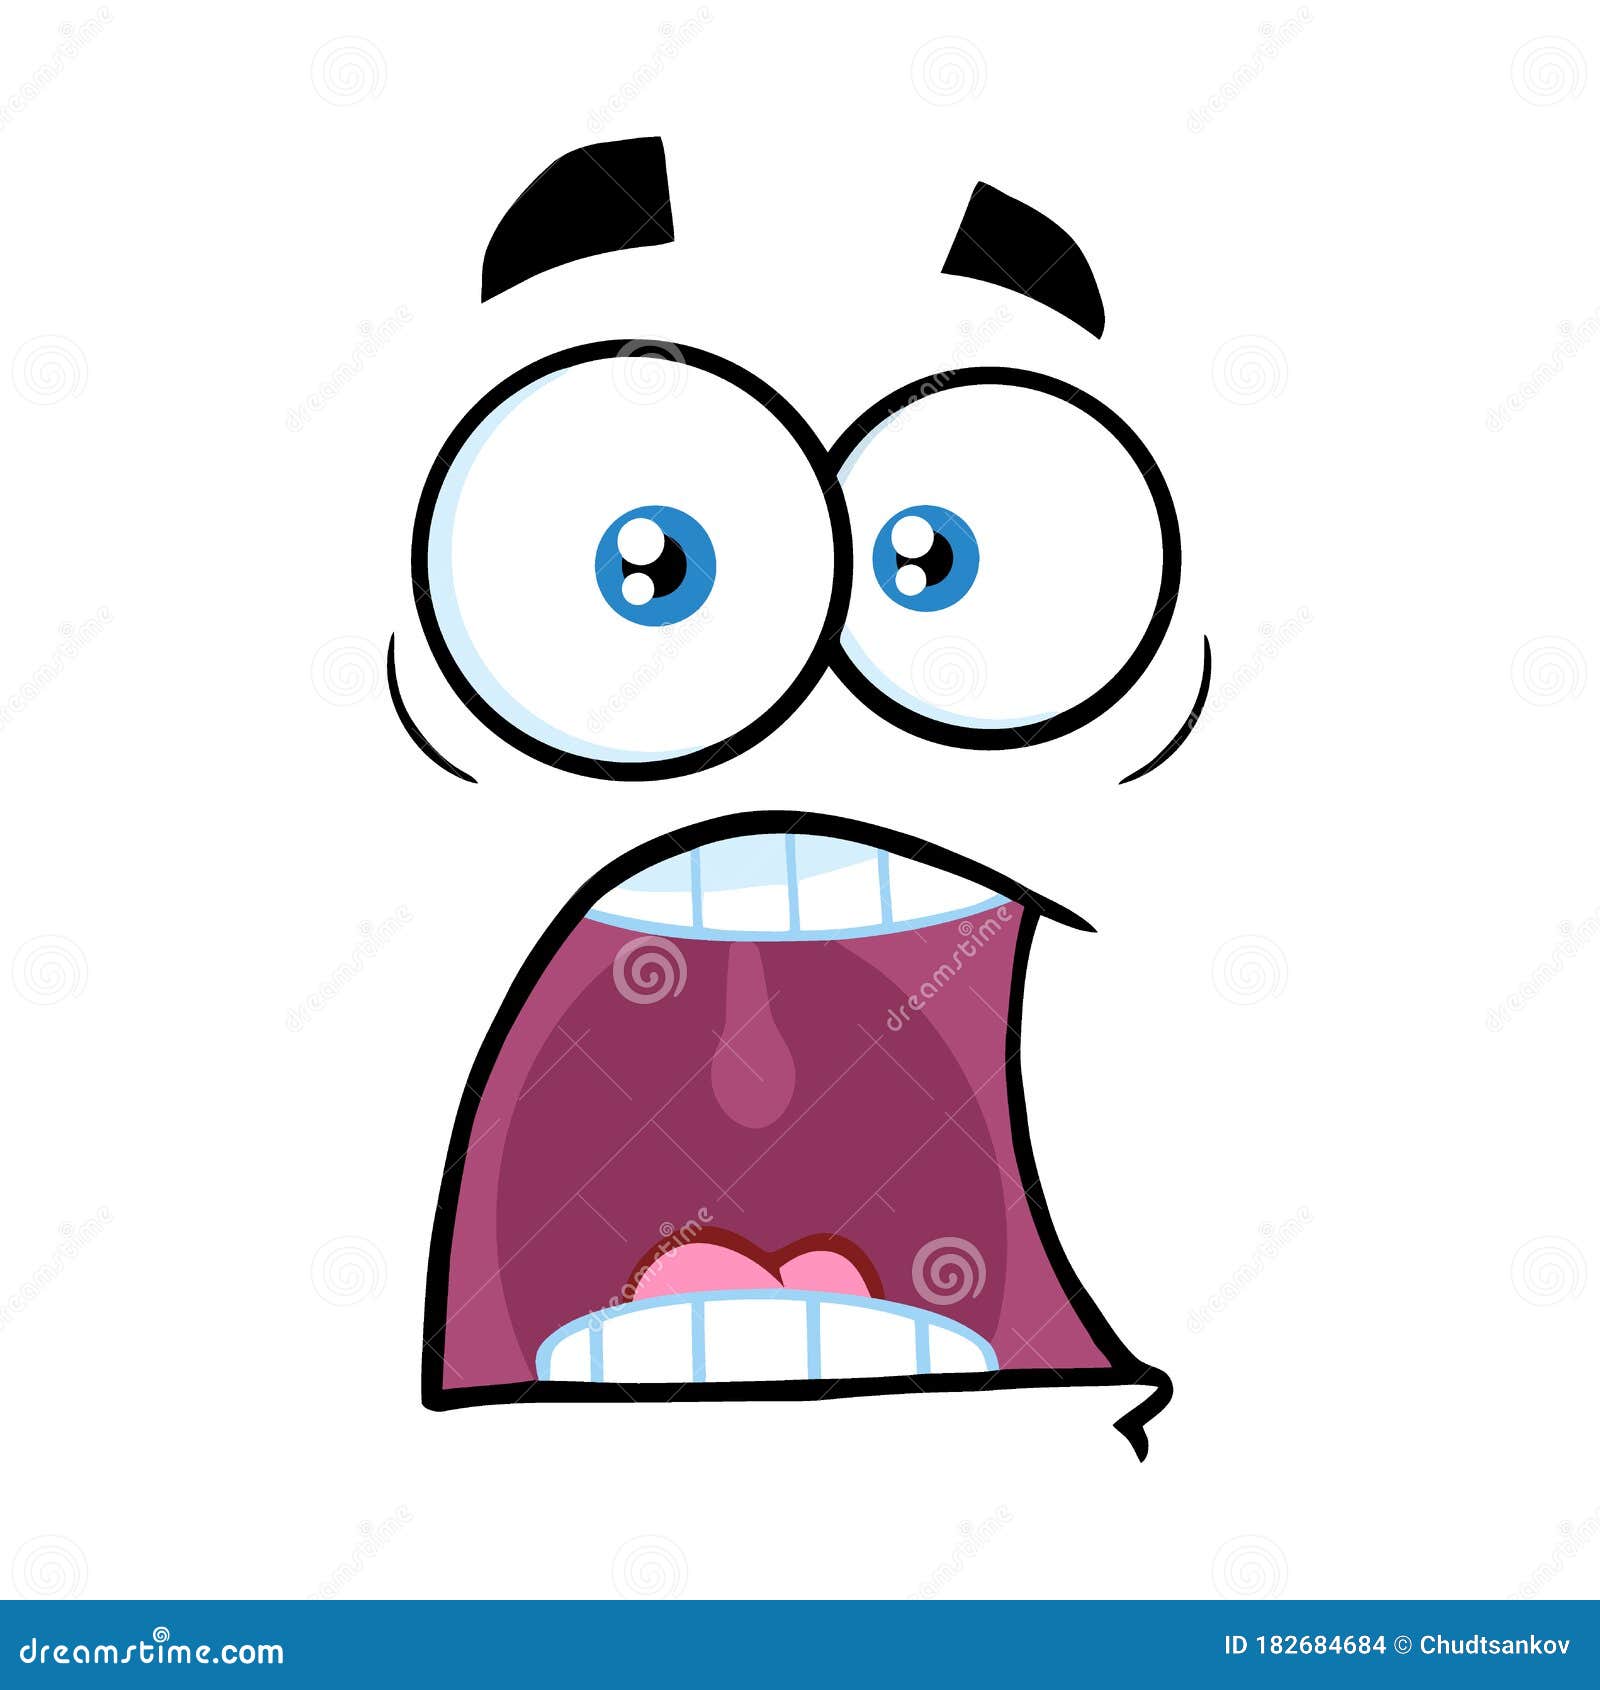 Scared Cartoon Funny Face with Panic Expression Stock Illustration -  Illustration of facial, design: 182684684